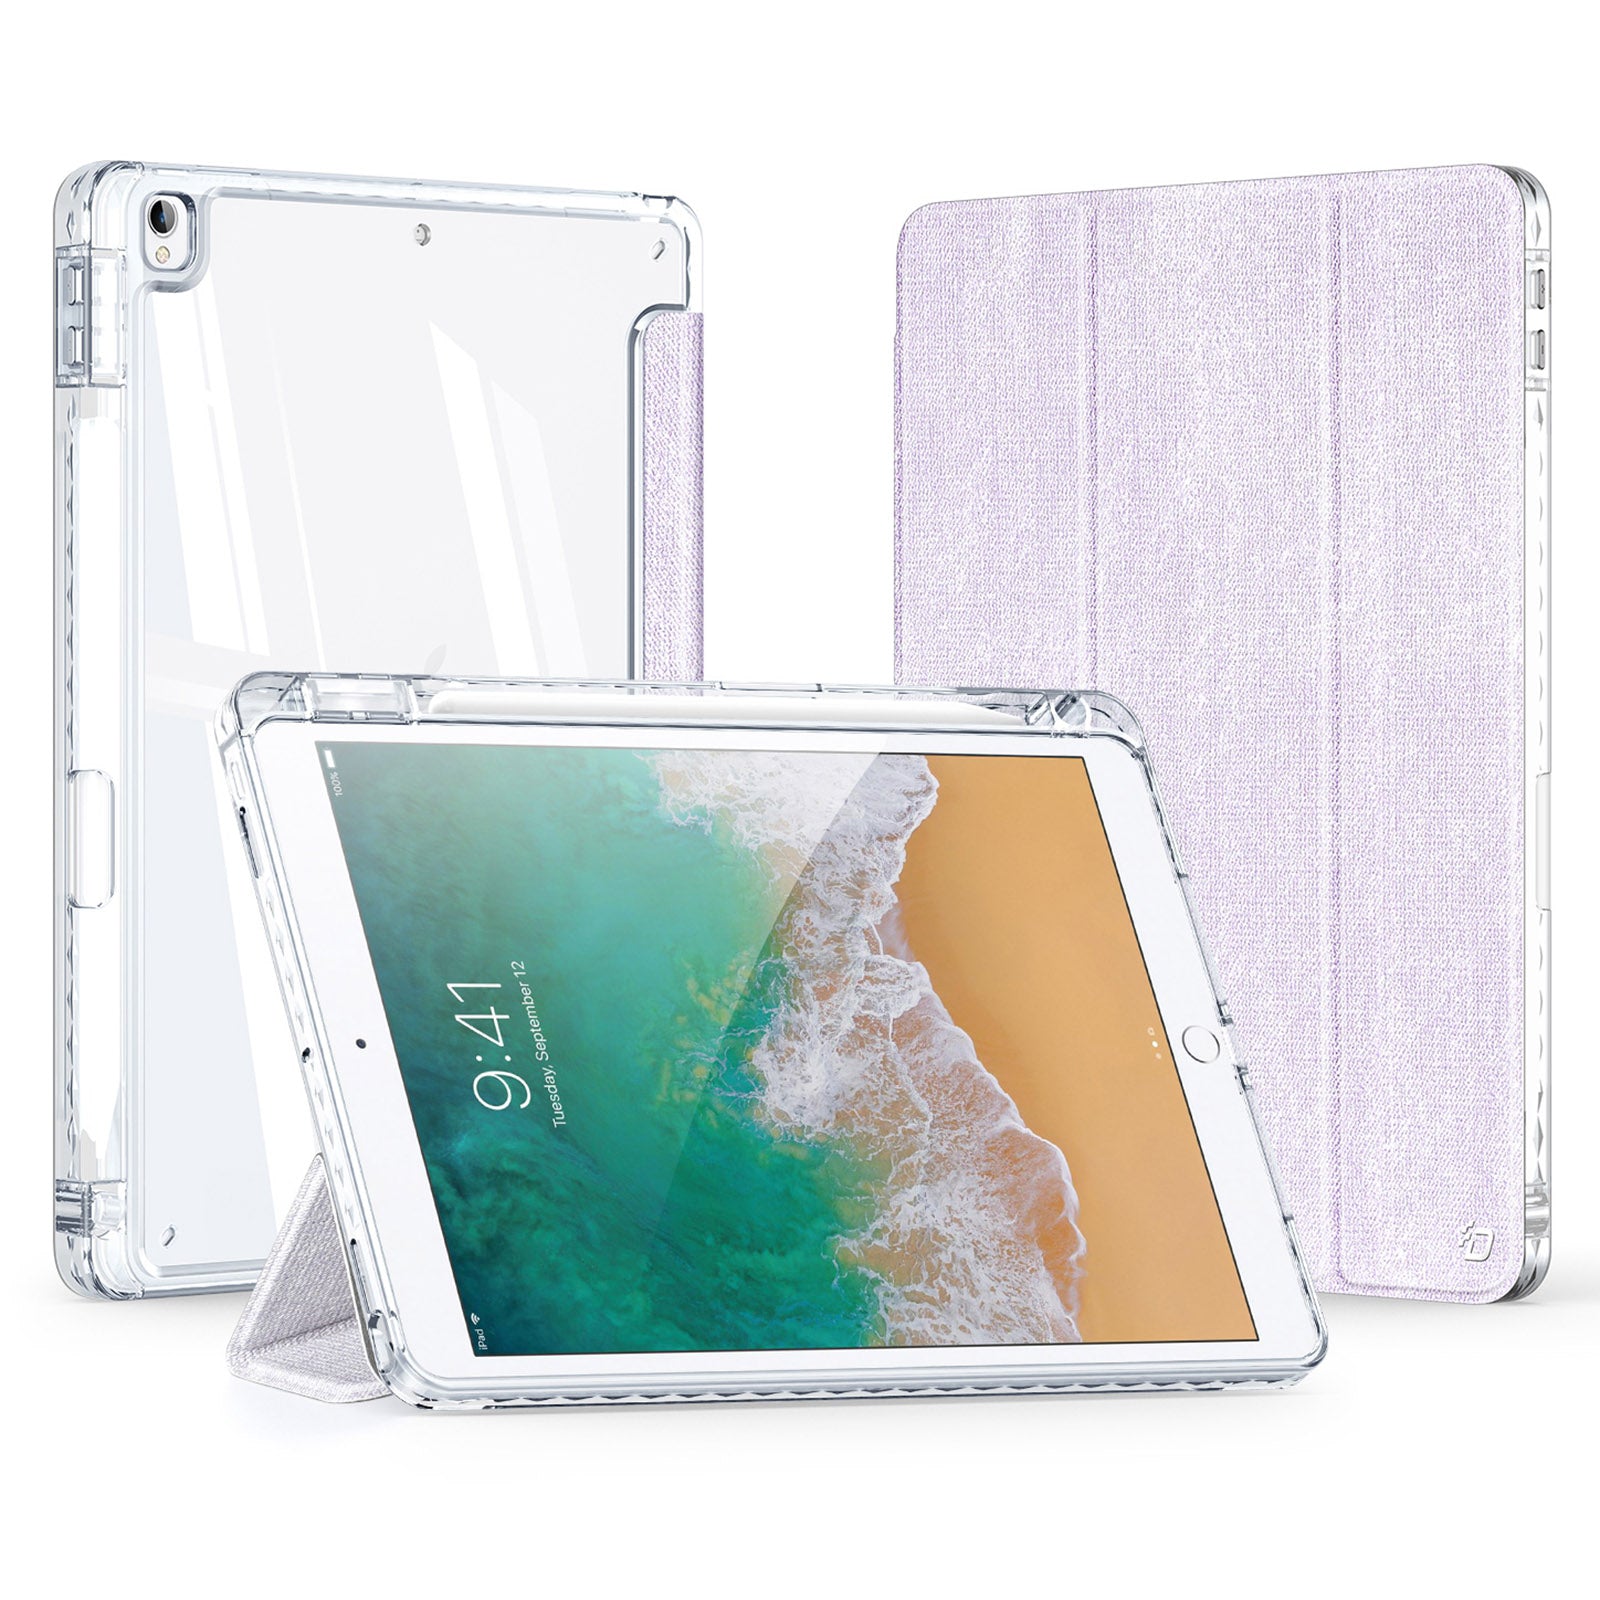 DUX DUCIS Unid Series For iPad 10.2 (2021) / (2020) / (2019) / iPad Air 10.5 inch (2019) / Pro 10.5-inch (2017) Leather Case Clear Back Cover - Light Purple